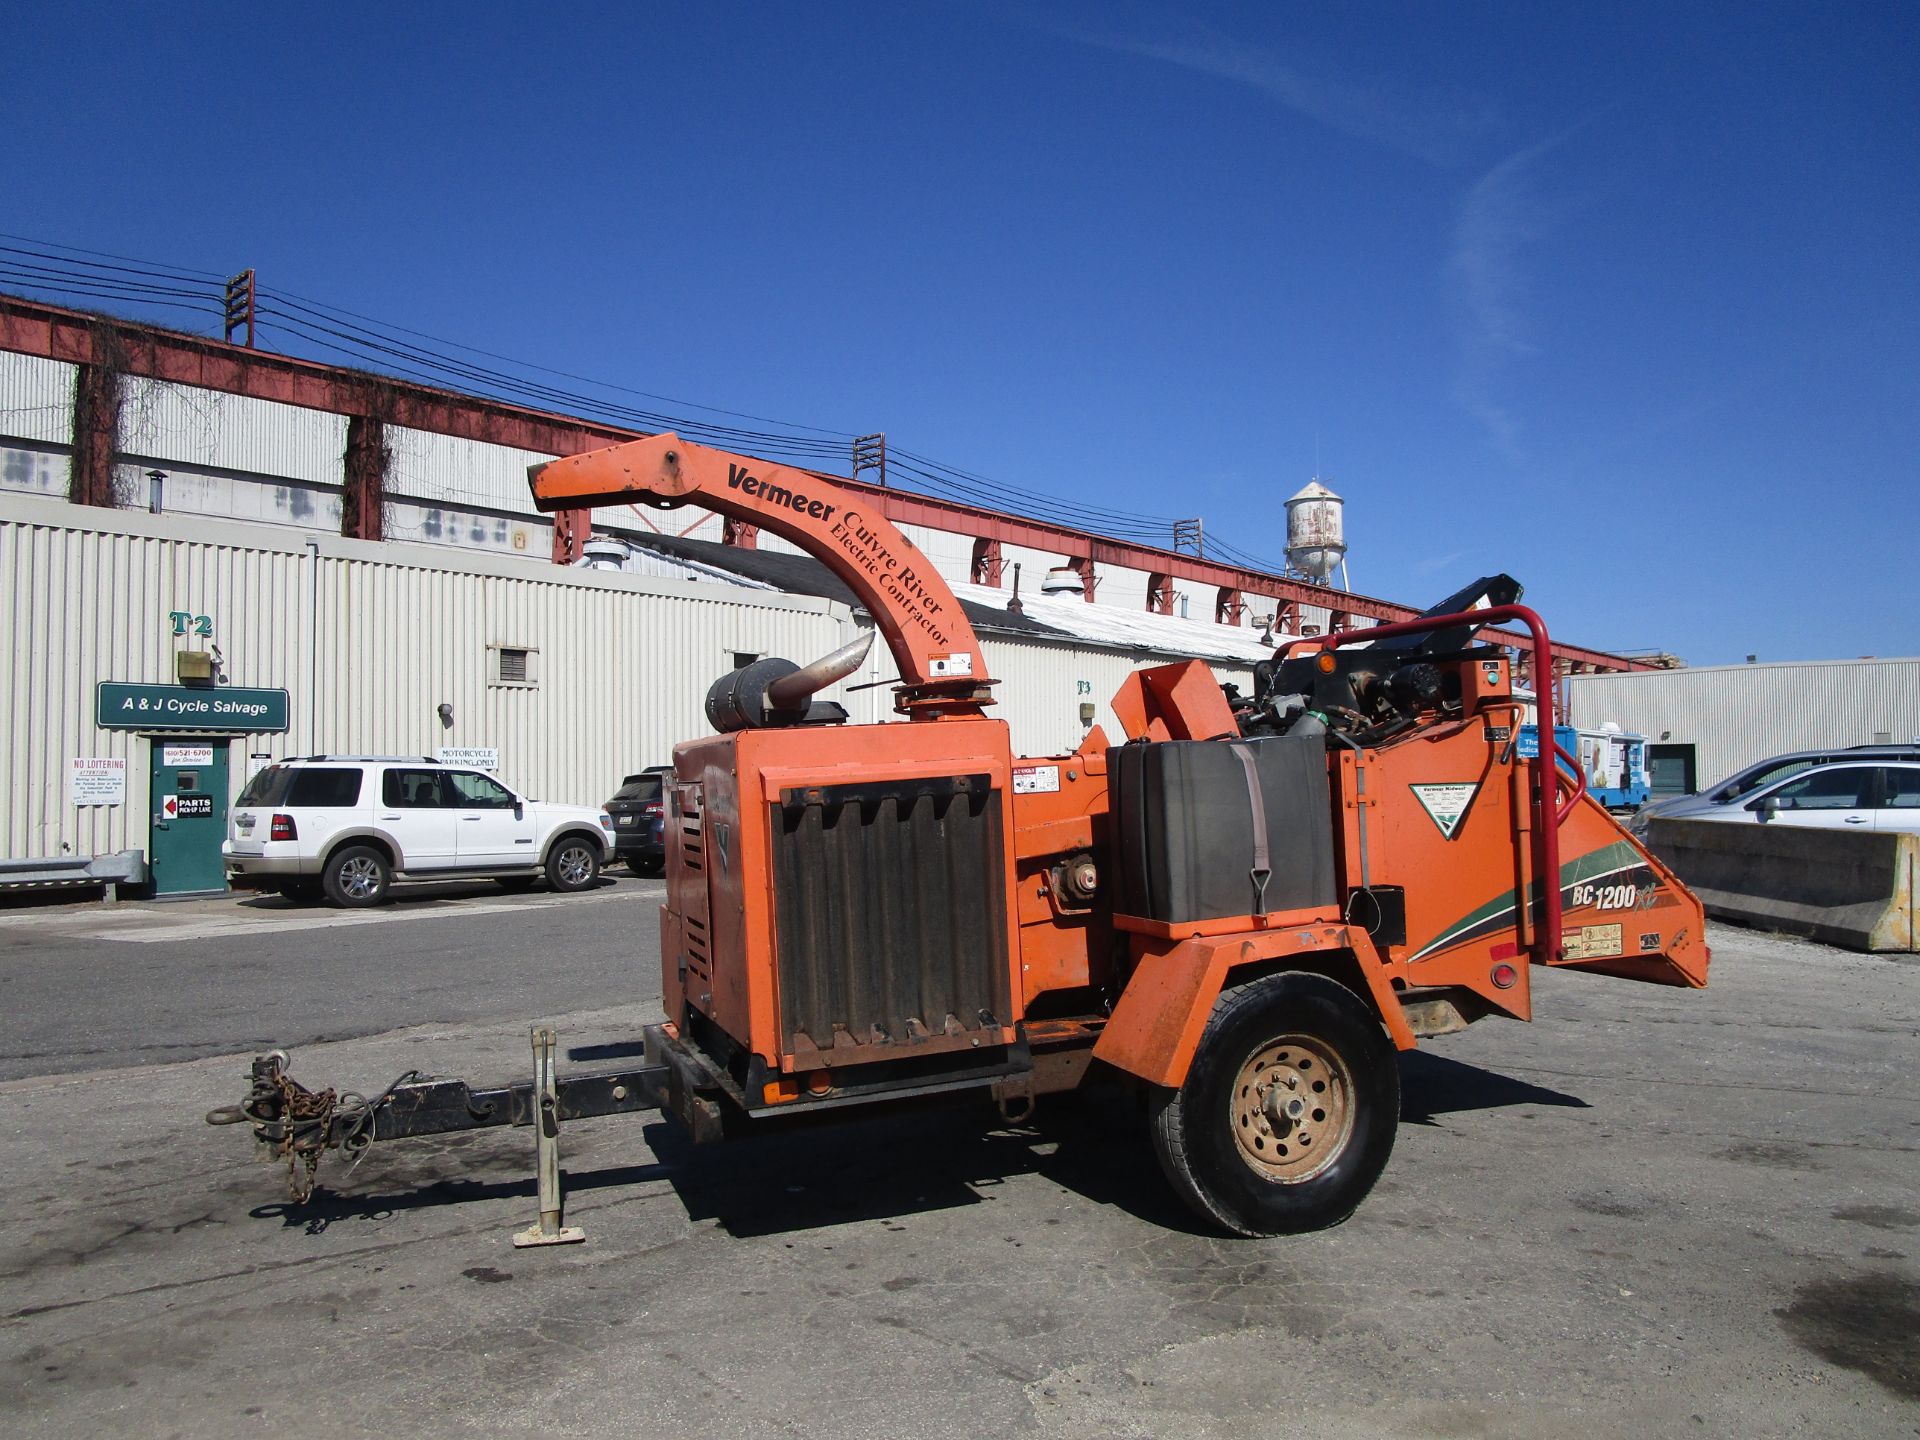 2011 Vermeer BC1200 Chipper - Image 4 of 10